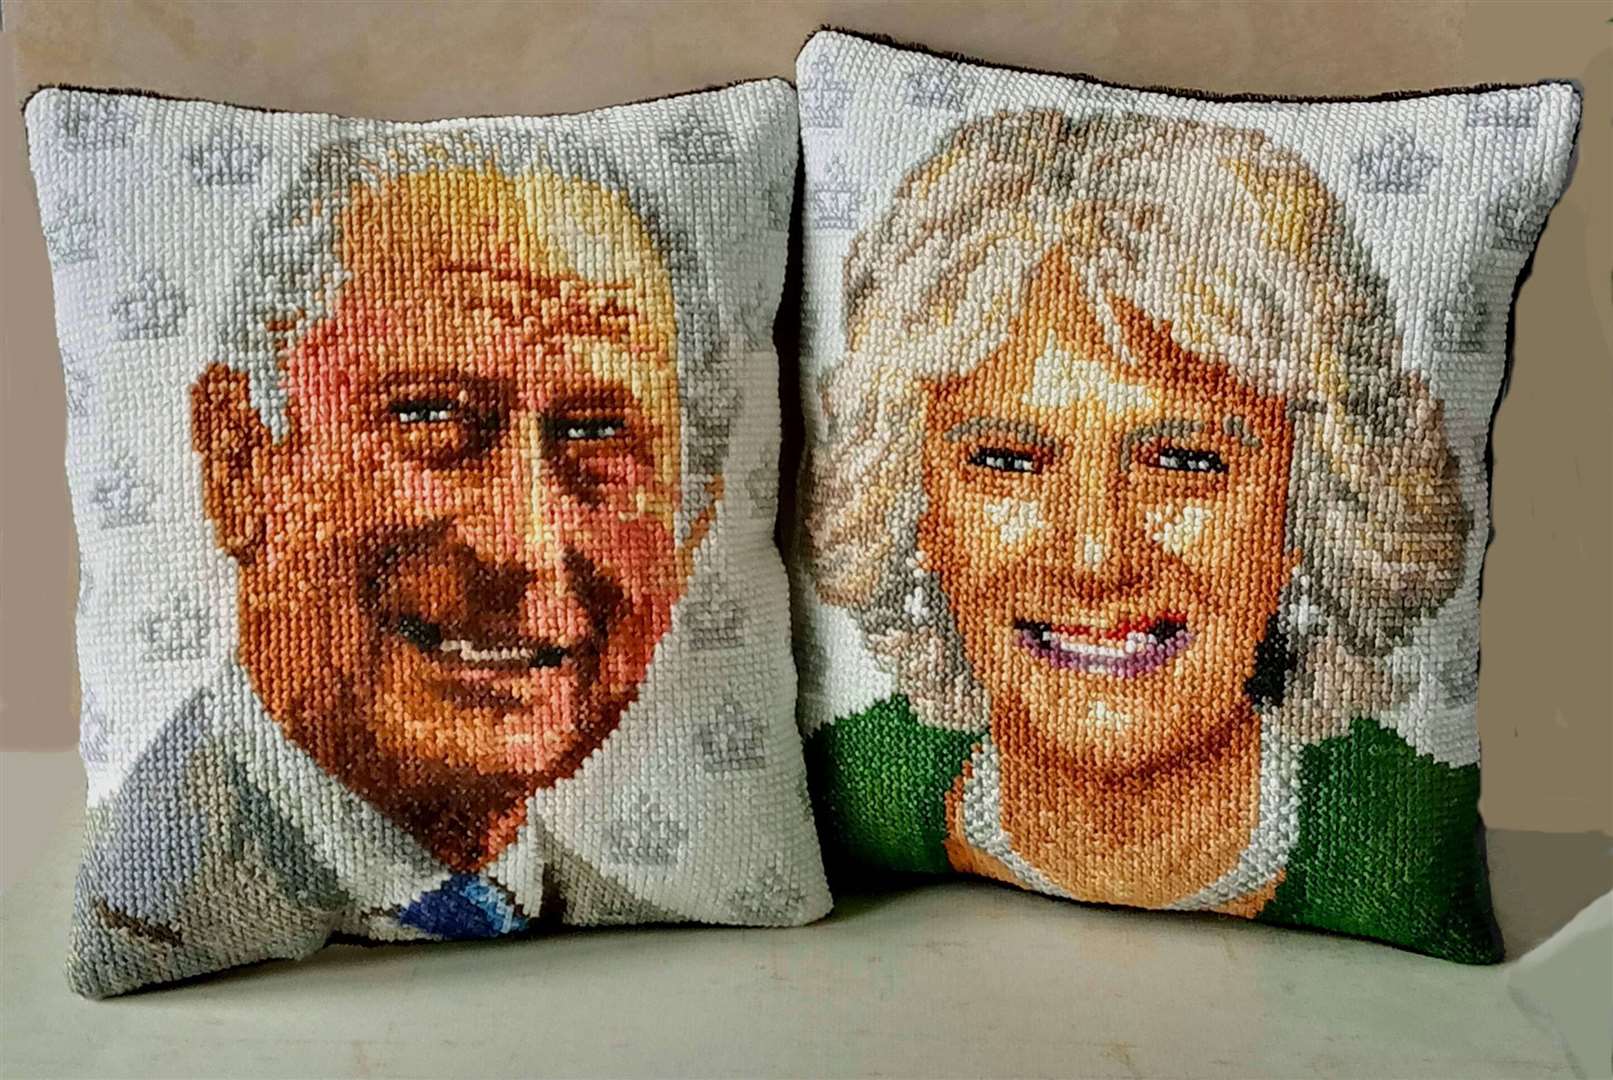 Charles and Camilla cushions have not been as popular as other royals